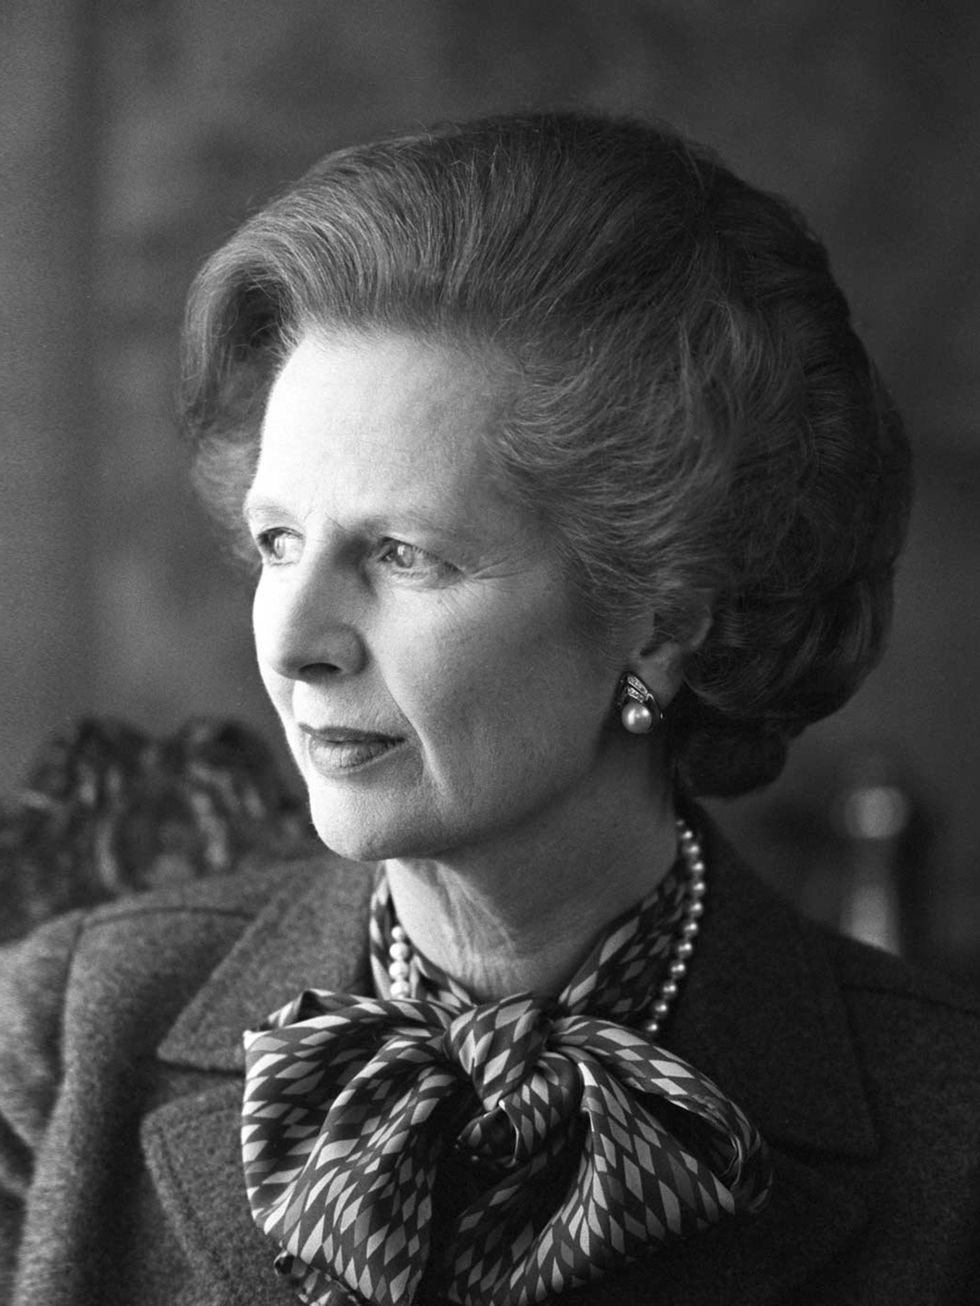 <p>Pussy BowsA softening touch to a harder look; Thatcher had an array of styles, colours and patterns, worn underneath her signature suits. </p><p>Margaret Thatcher poses inside Number 10 Downing Street in London, England on April, 1984.</p>